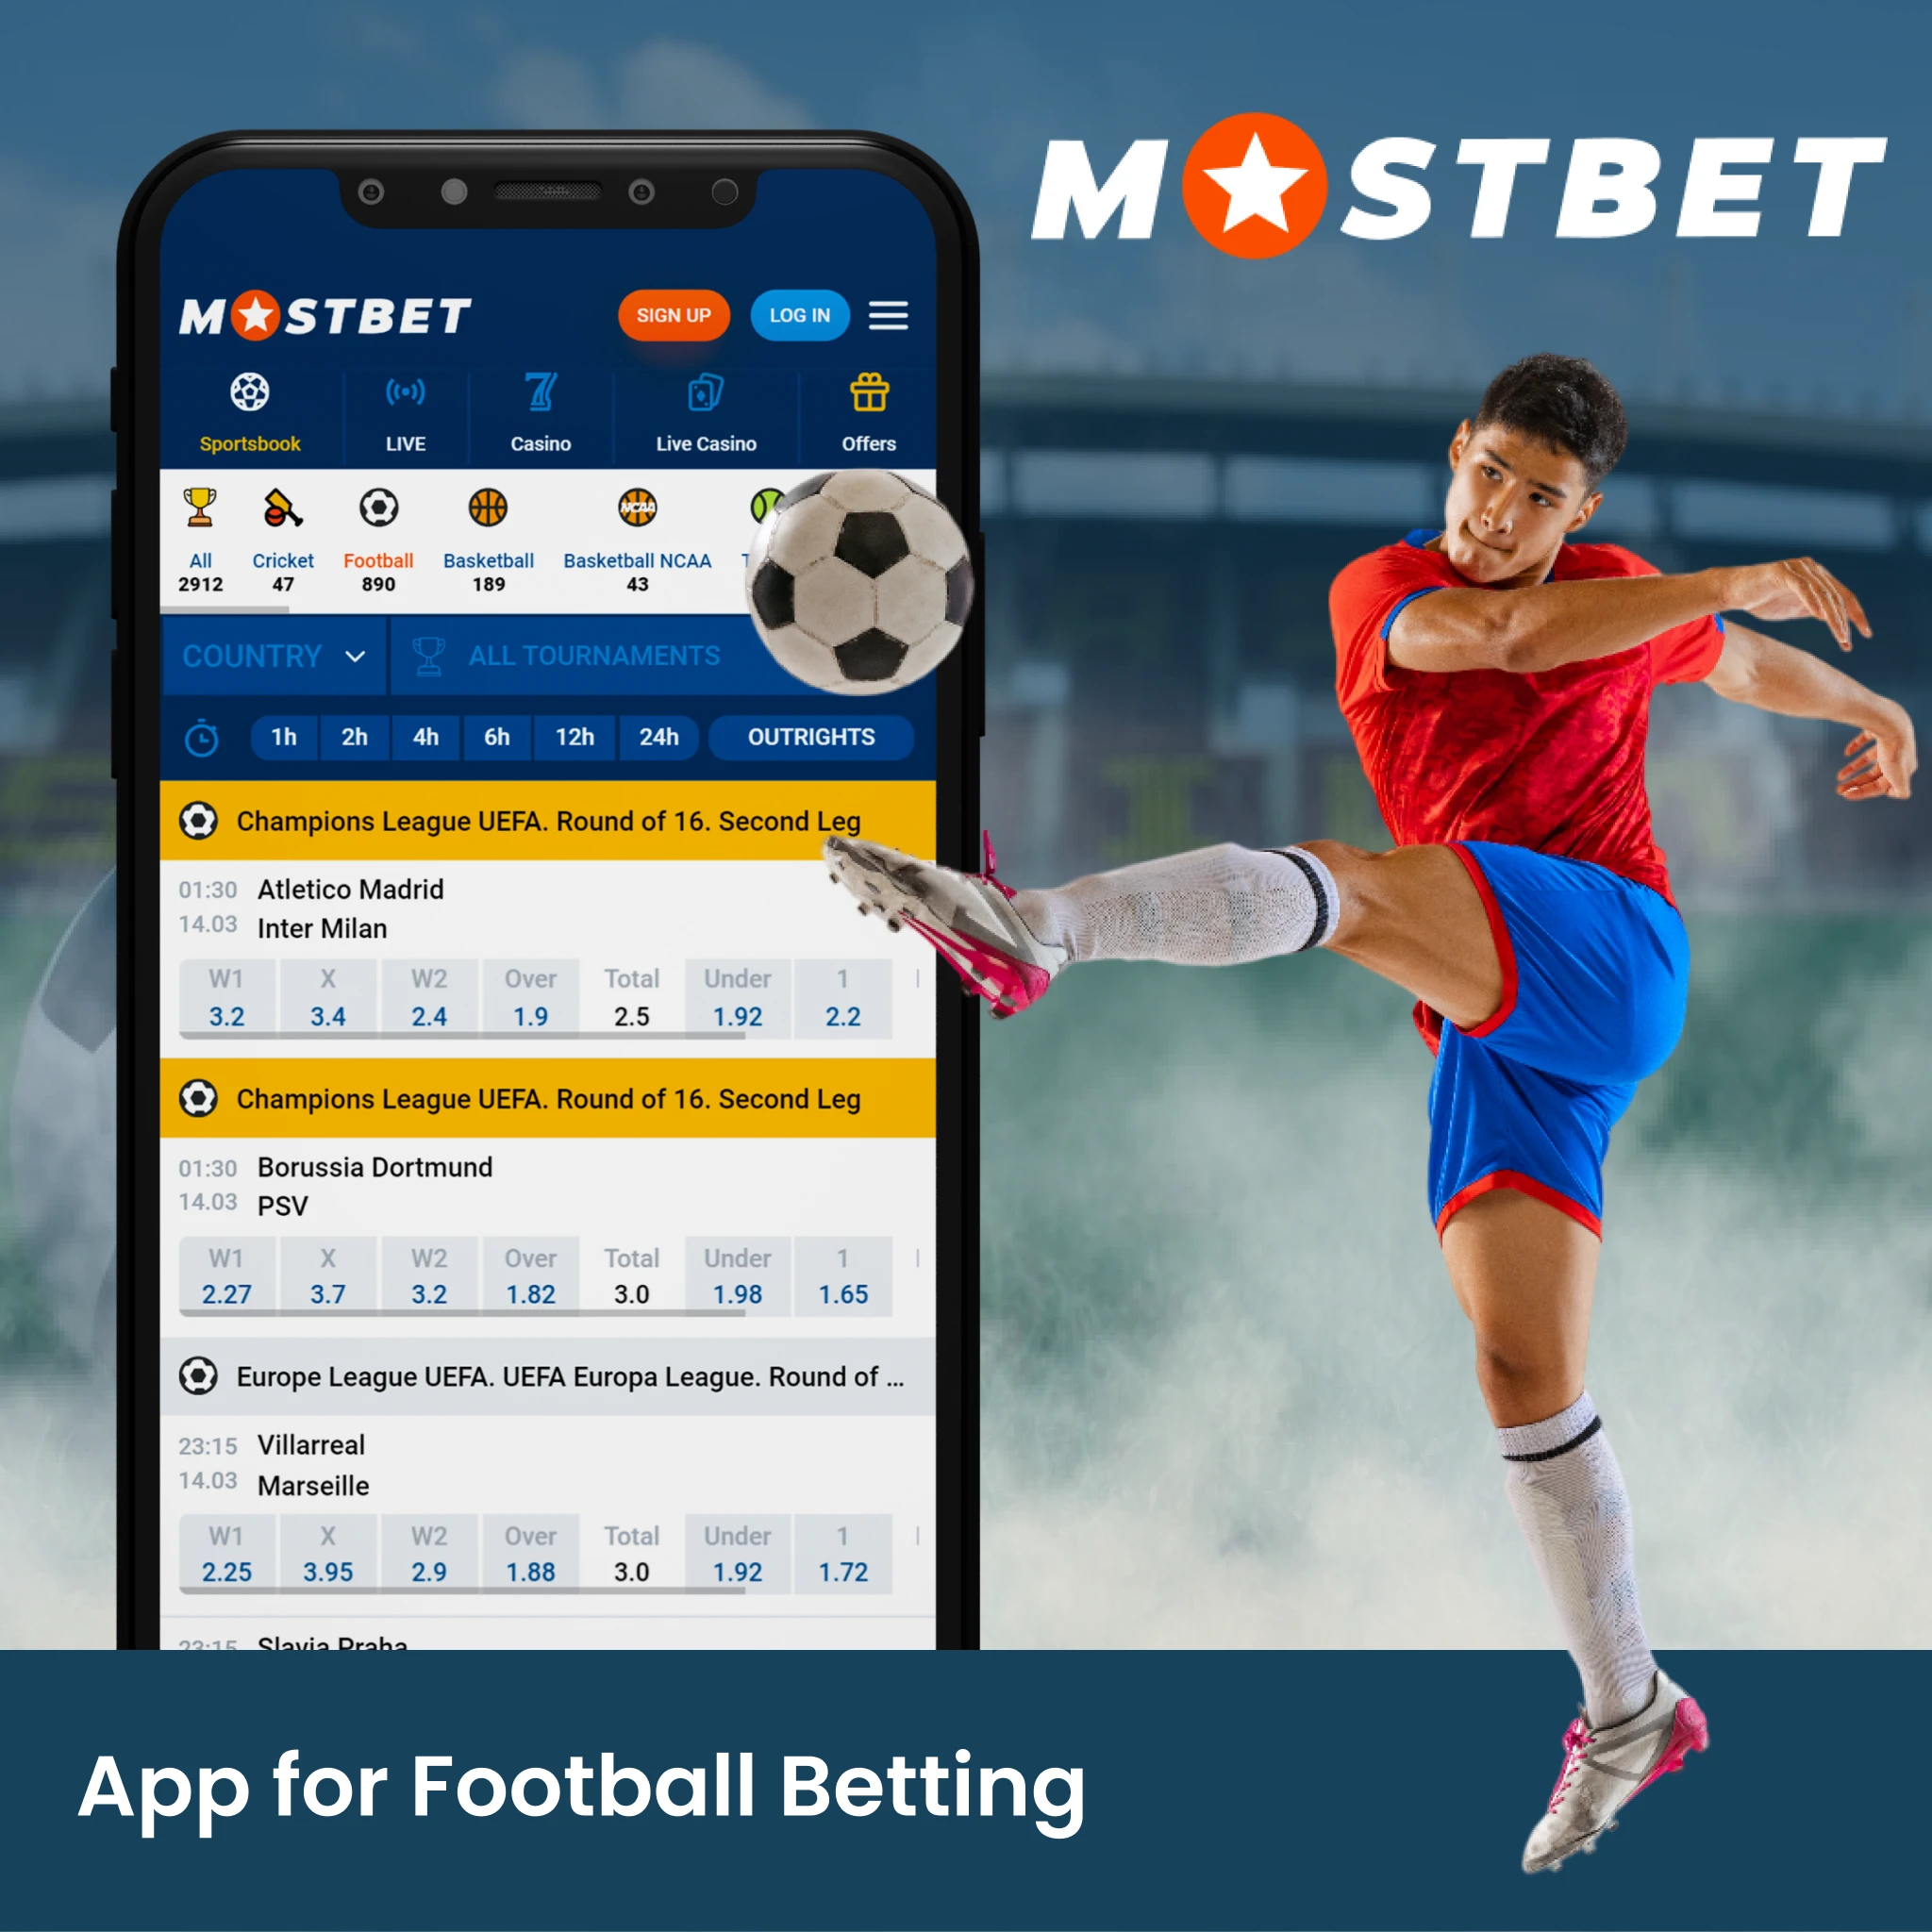 Experience the diverse football betting options and different features offered by Mostbet app.